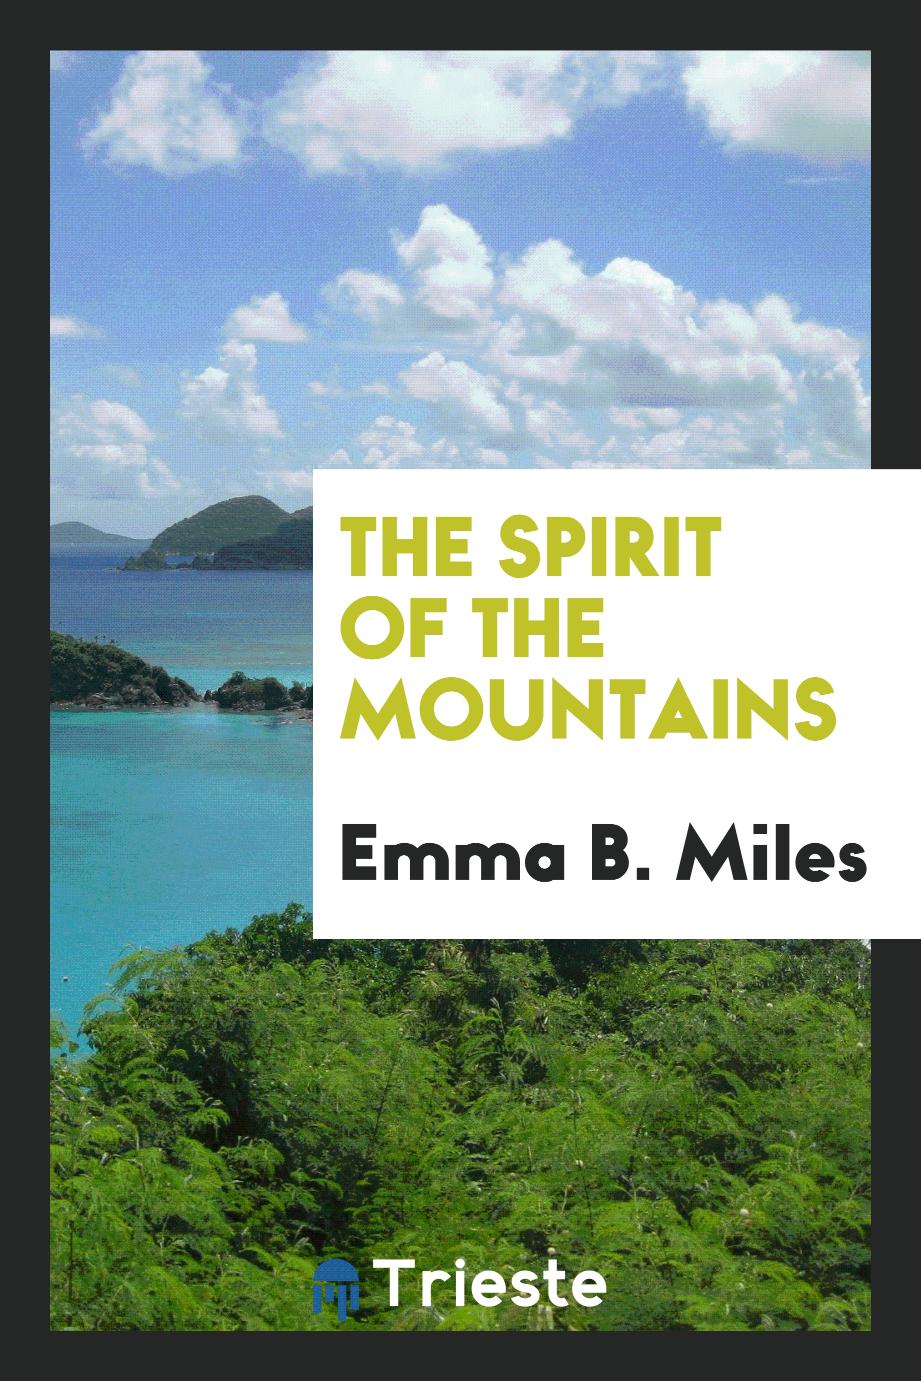 The spirit of the mountains